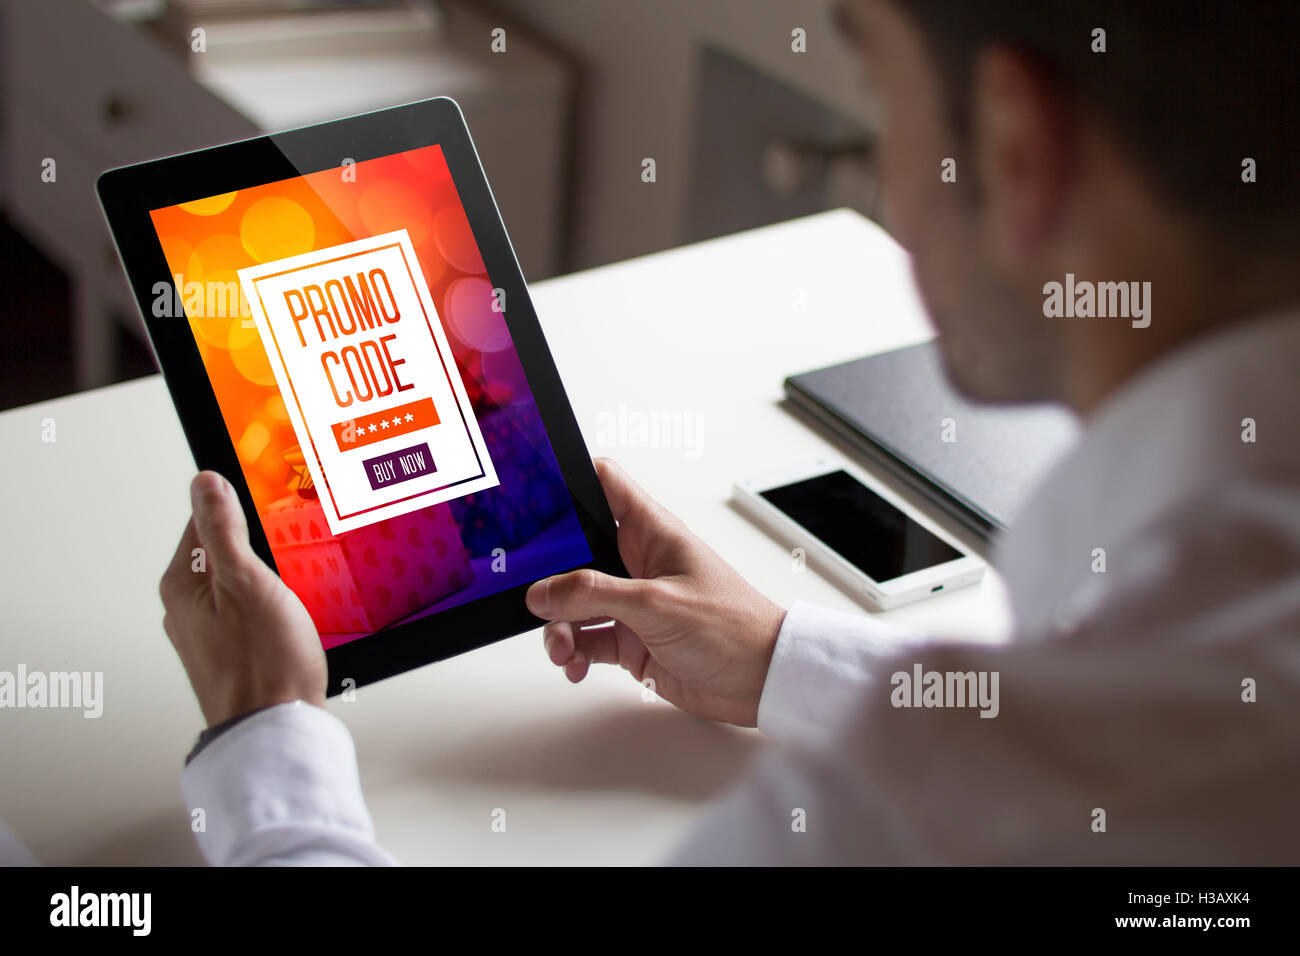 bussinessman at office holding a tablet exchanging a promotional code. All screen graphics are made up. Stock Photo